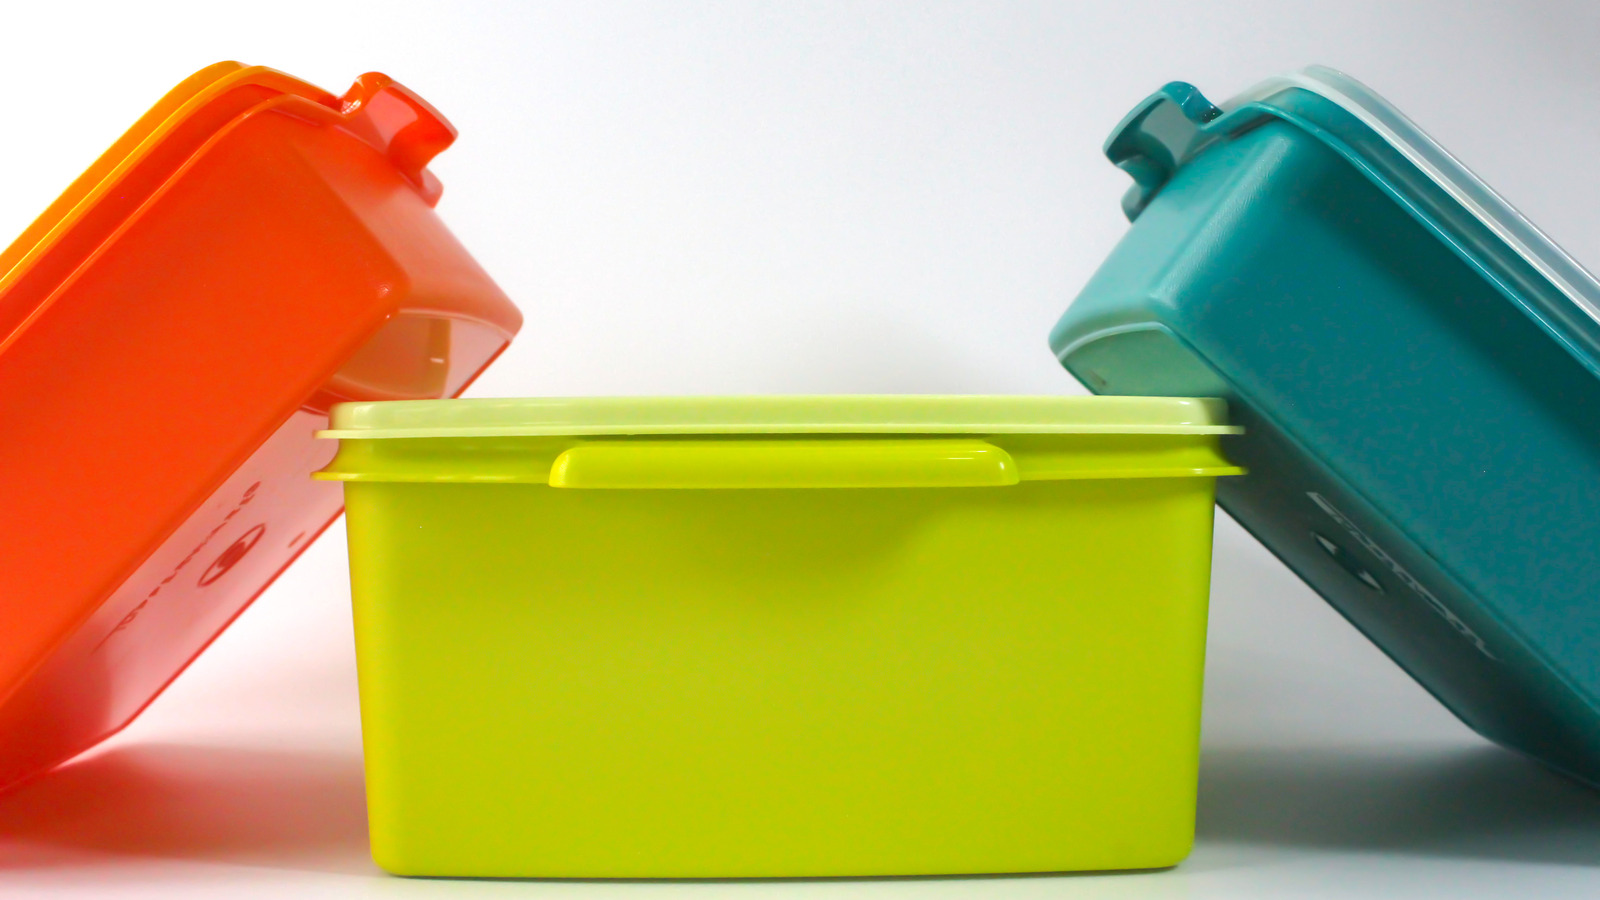 https://www.housedigest.com/img/gallery/this-tiktok-hack-will-show-you-how-to-get-your-tupperware-under-control/l-intro-1658328632.jpg